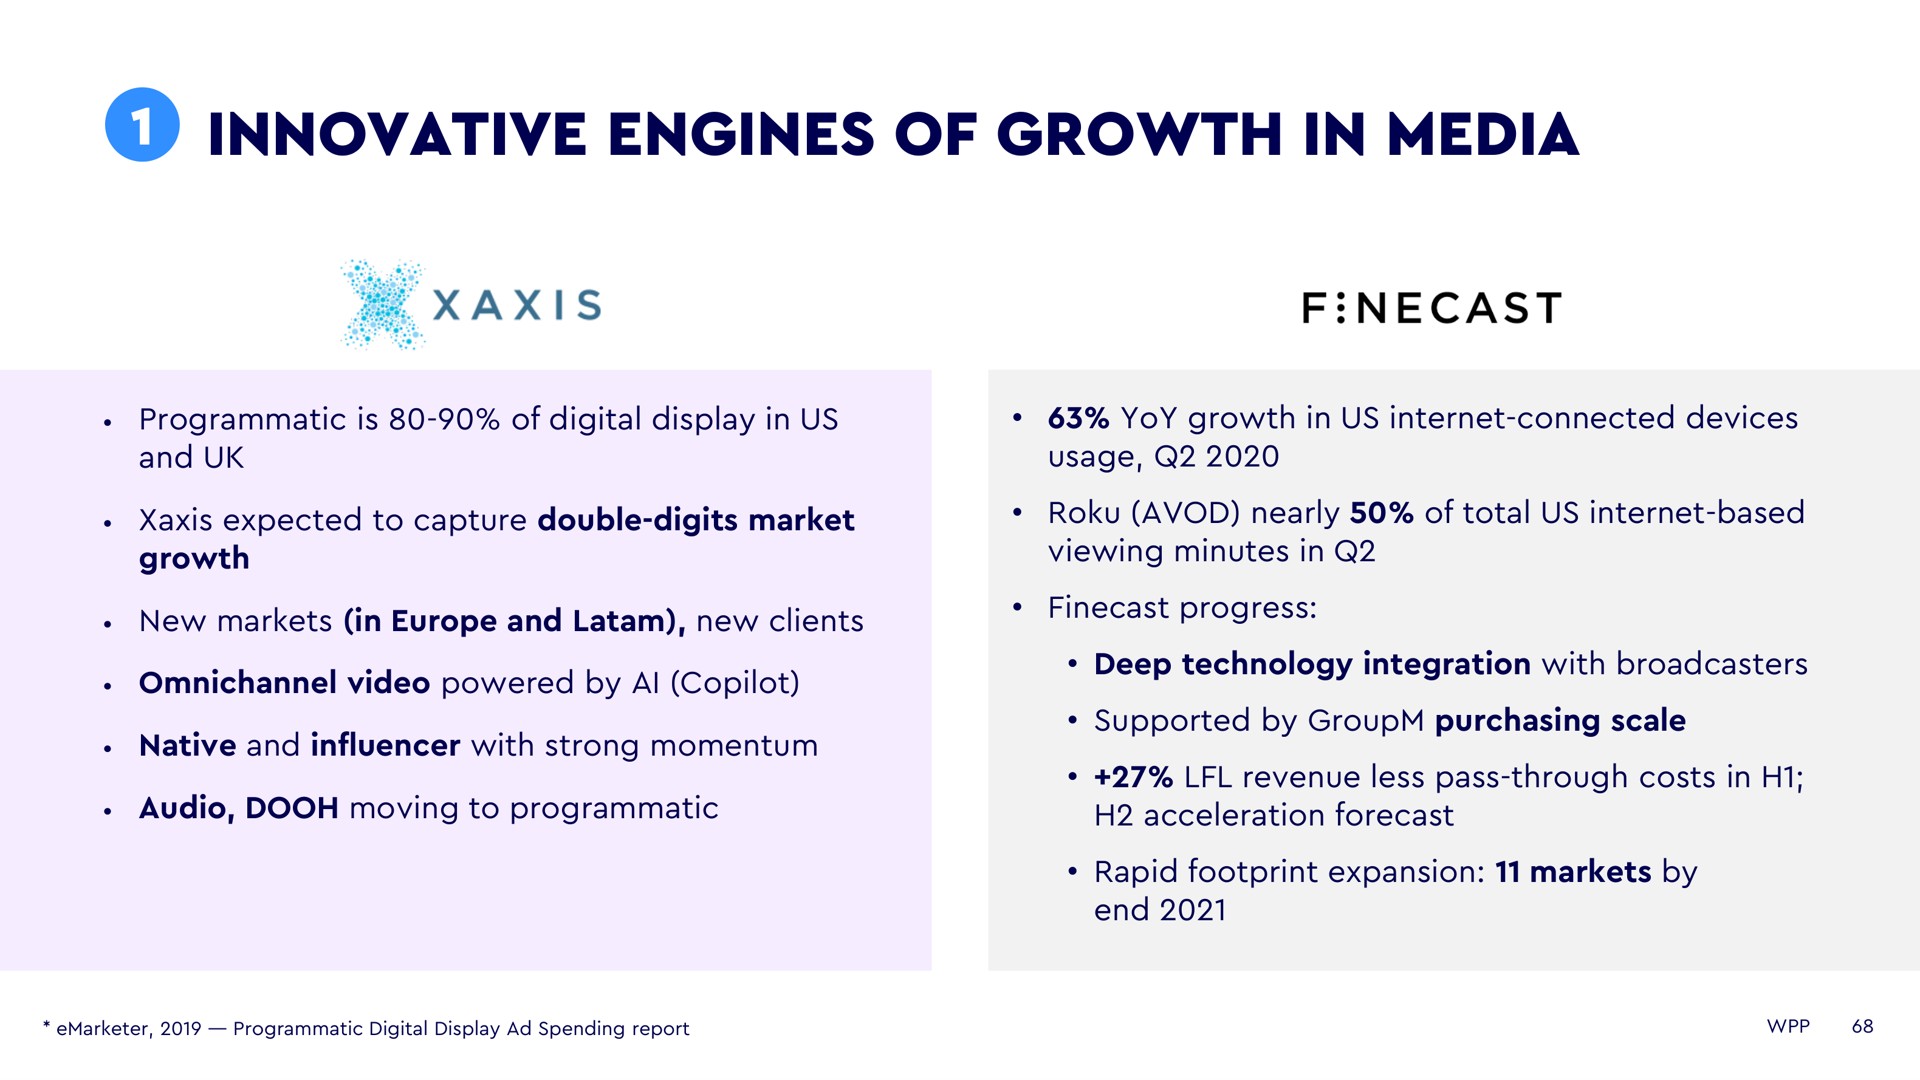 innovative engines of growth in media | WPP